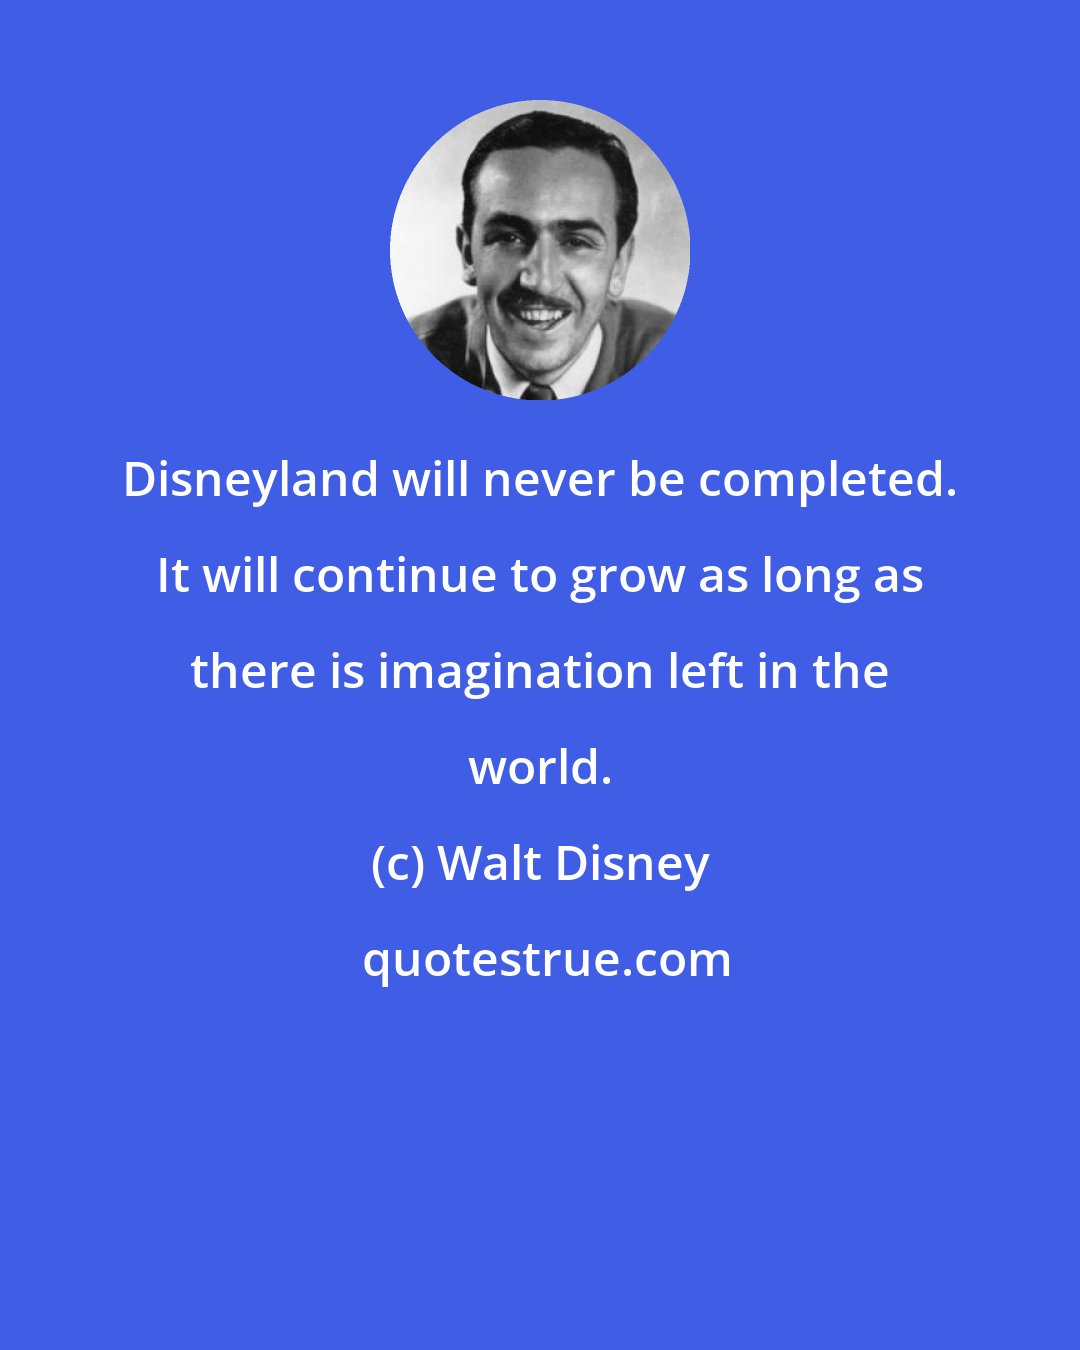 Walt Disney: Disneyland will never be completed. It will continue to grow as long as there is imagination left in the world.